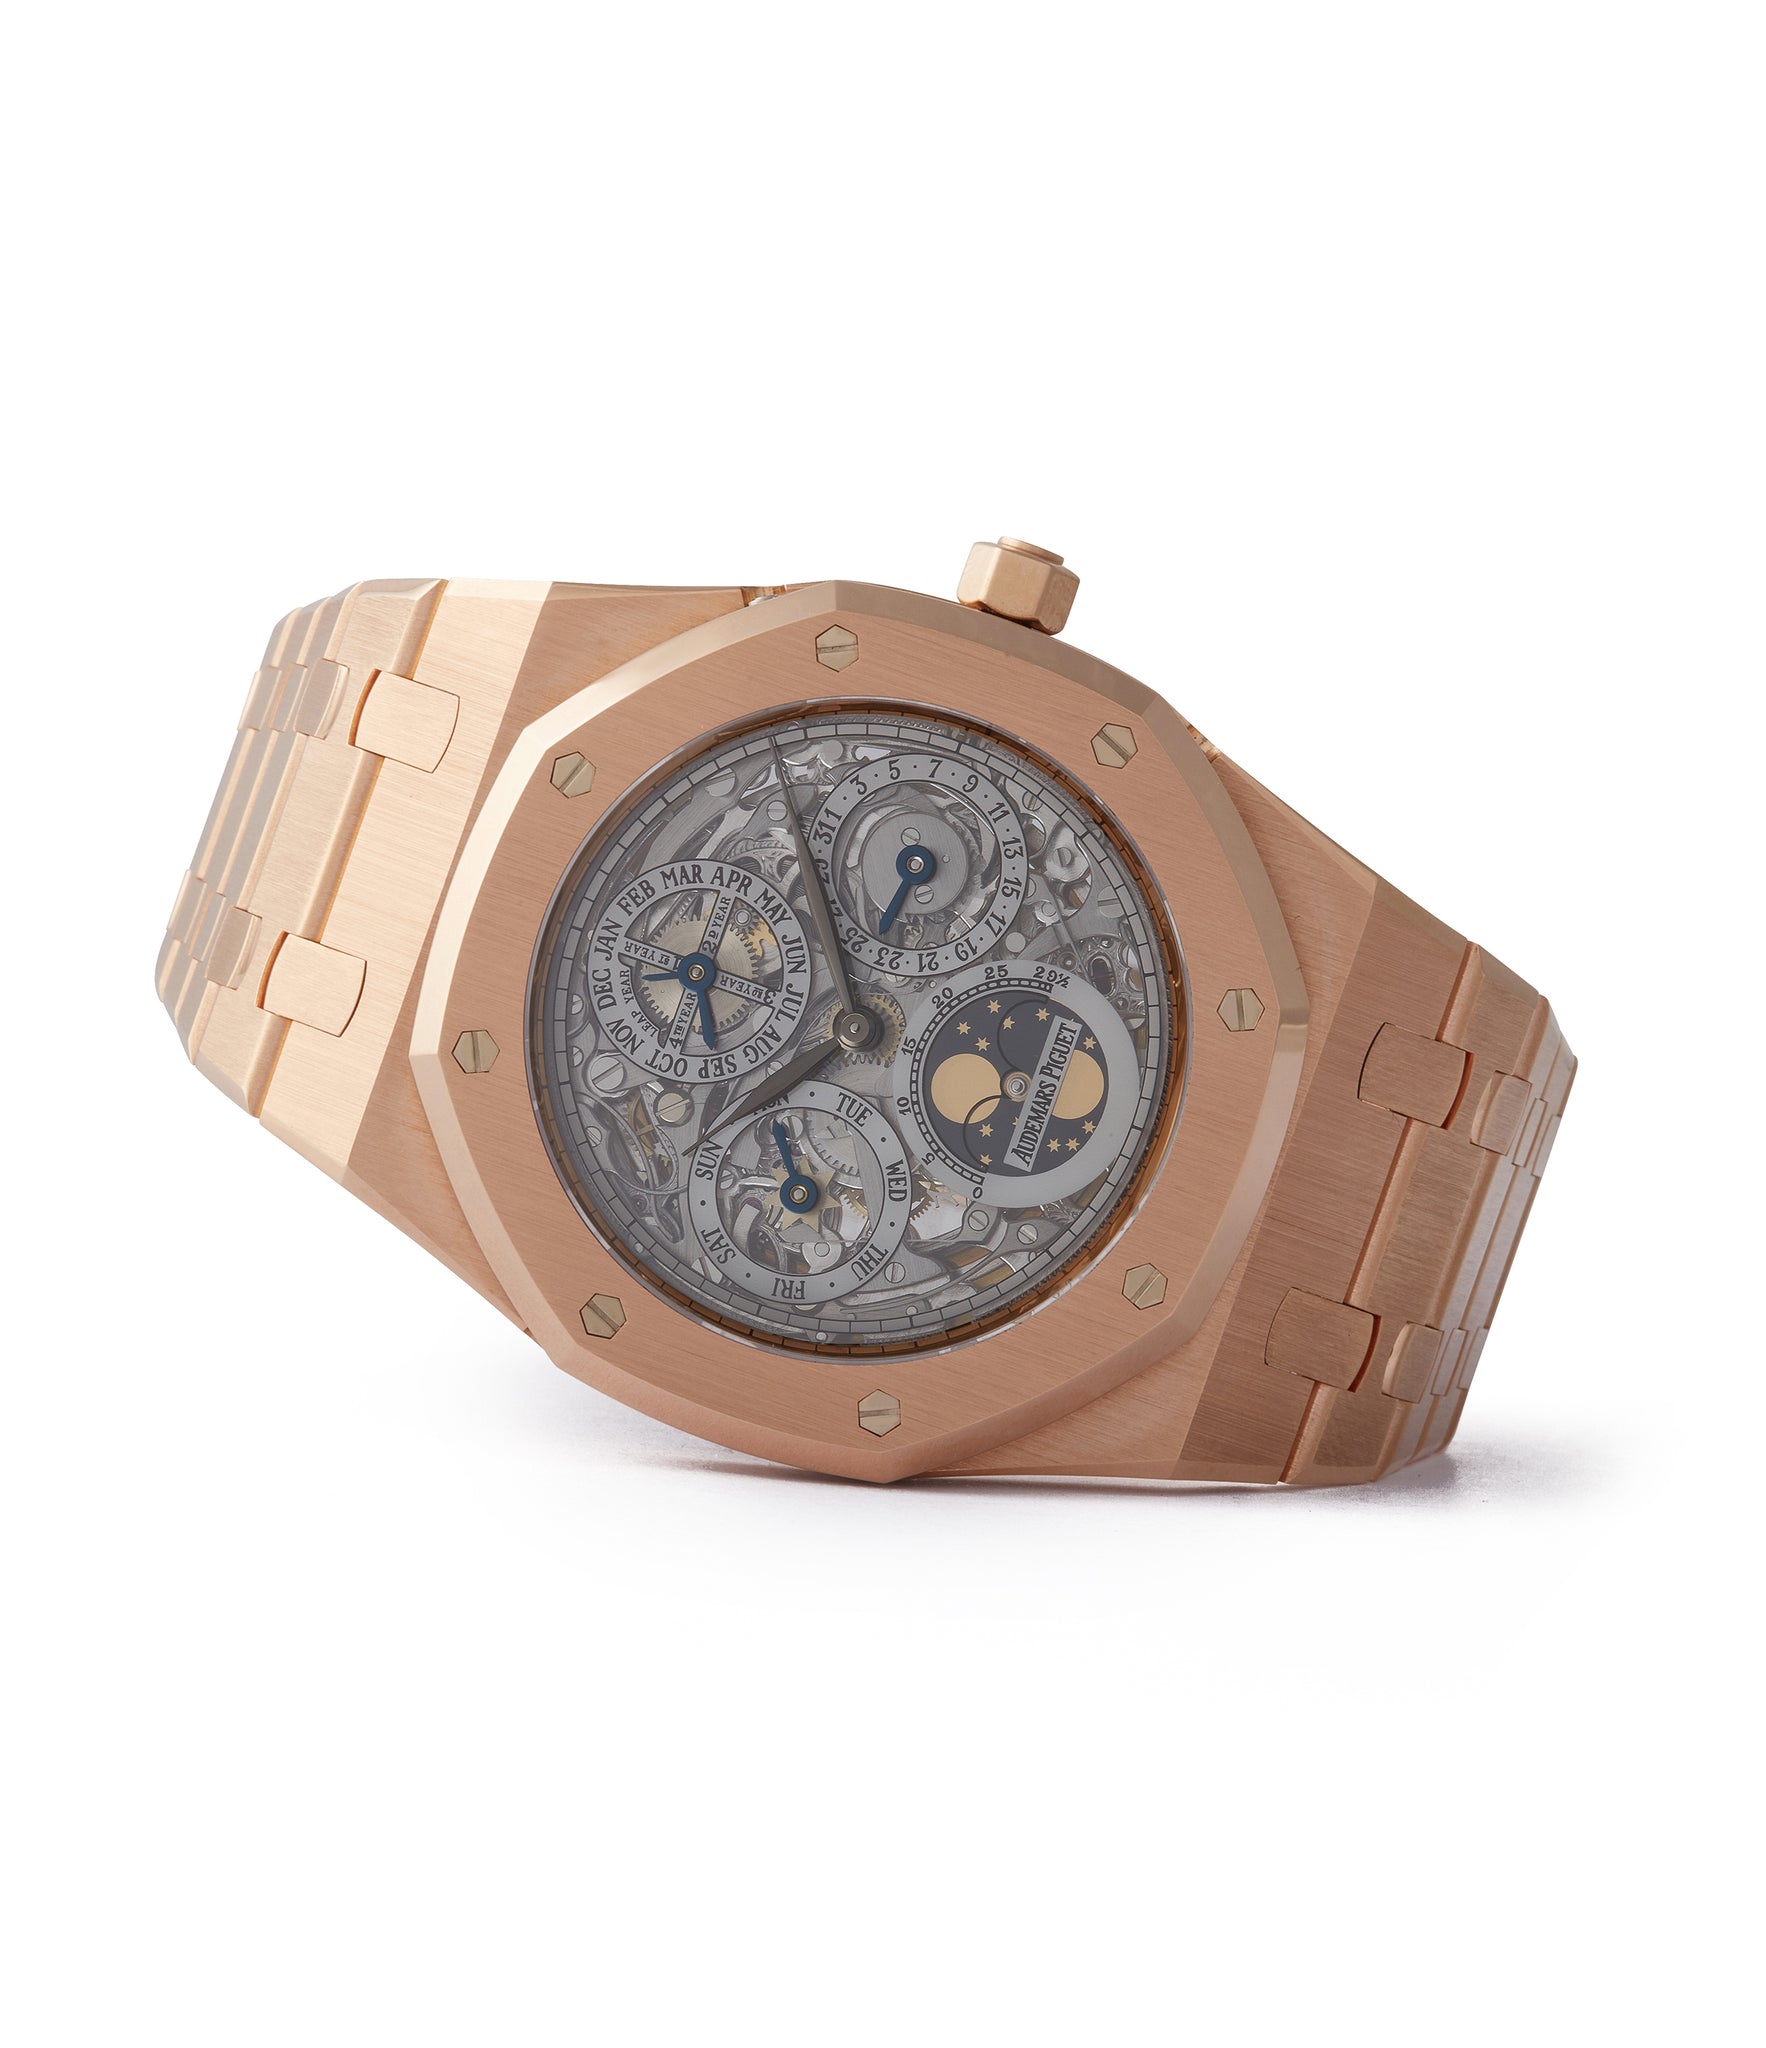 side-shot Royal Oak Audemars Piguet Quantieme Perpetual Calendar 25829OR rose gold skeletonised pre-owned sport watch for sale online at A Collected Man London UK specialist of rare watches